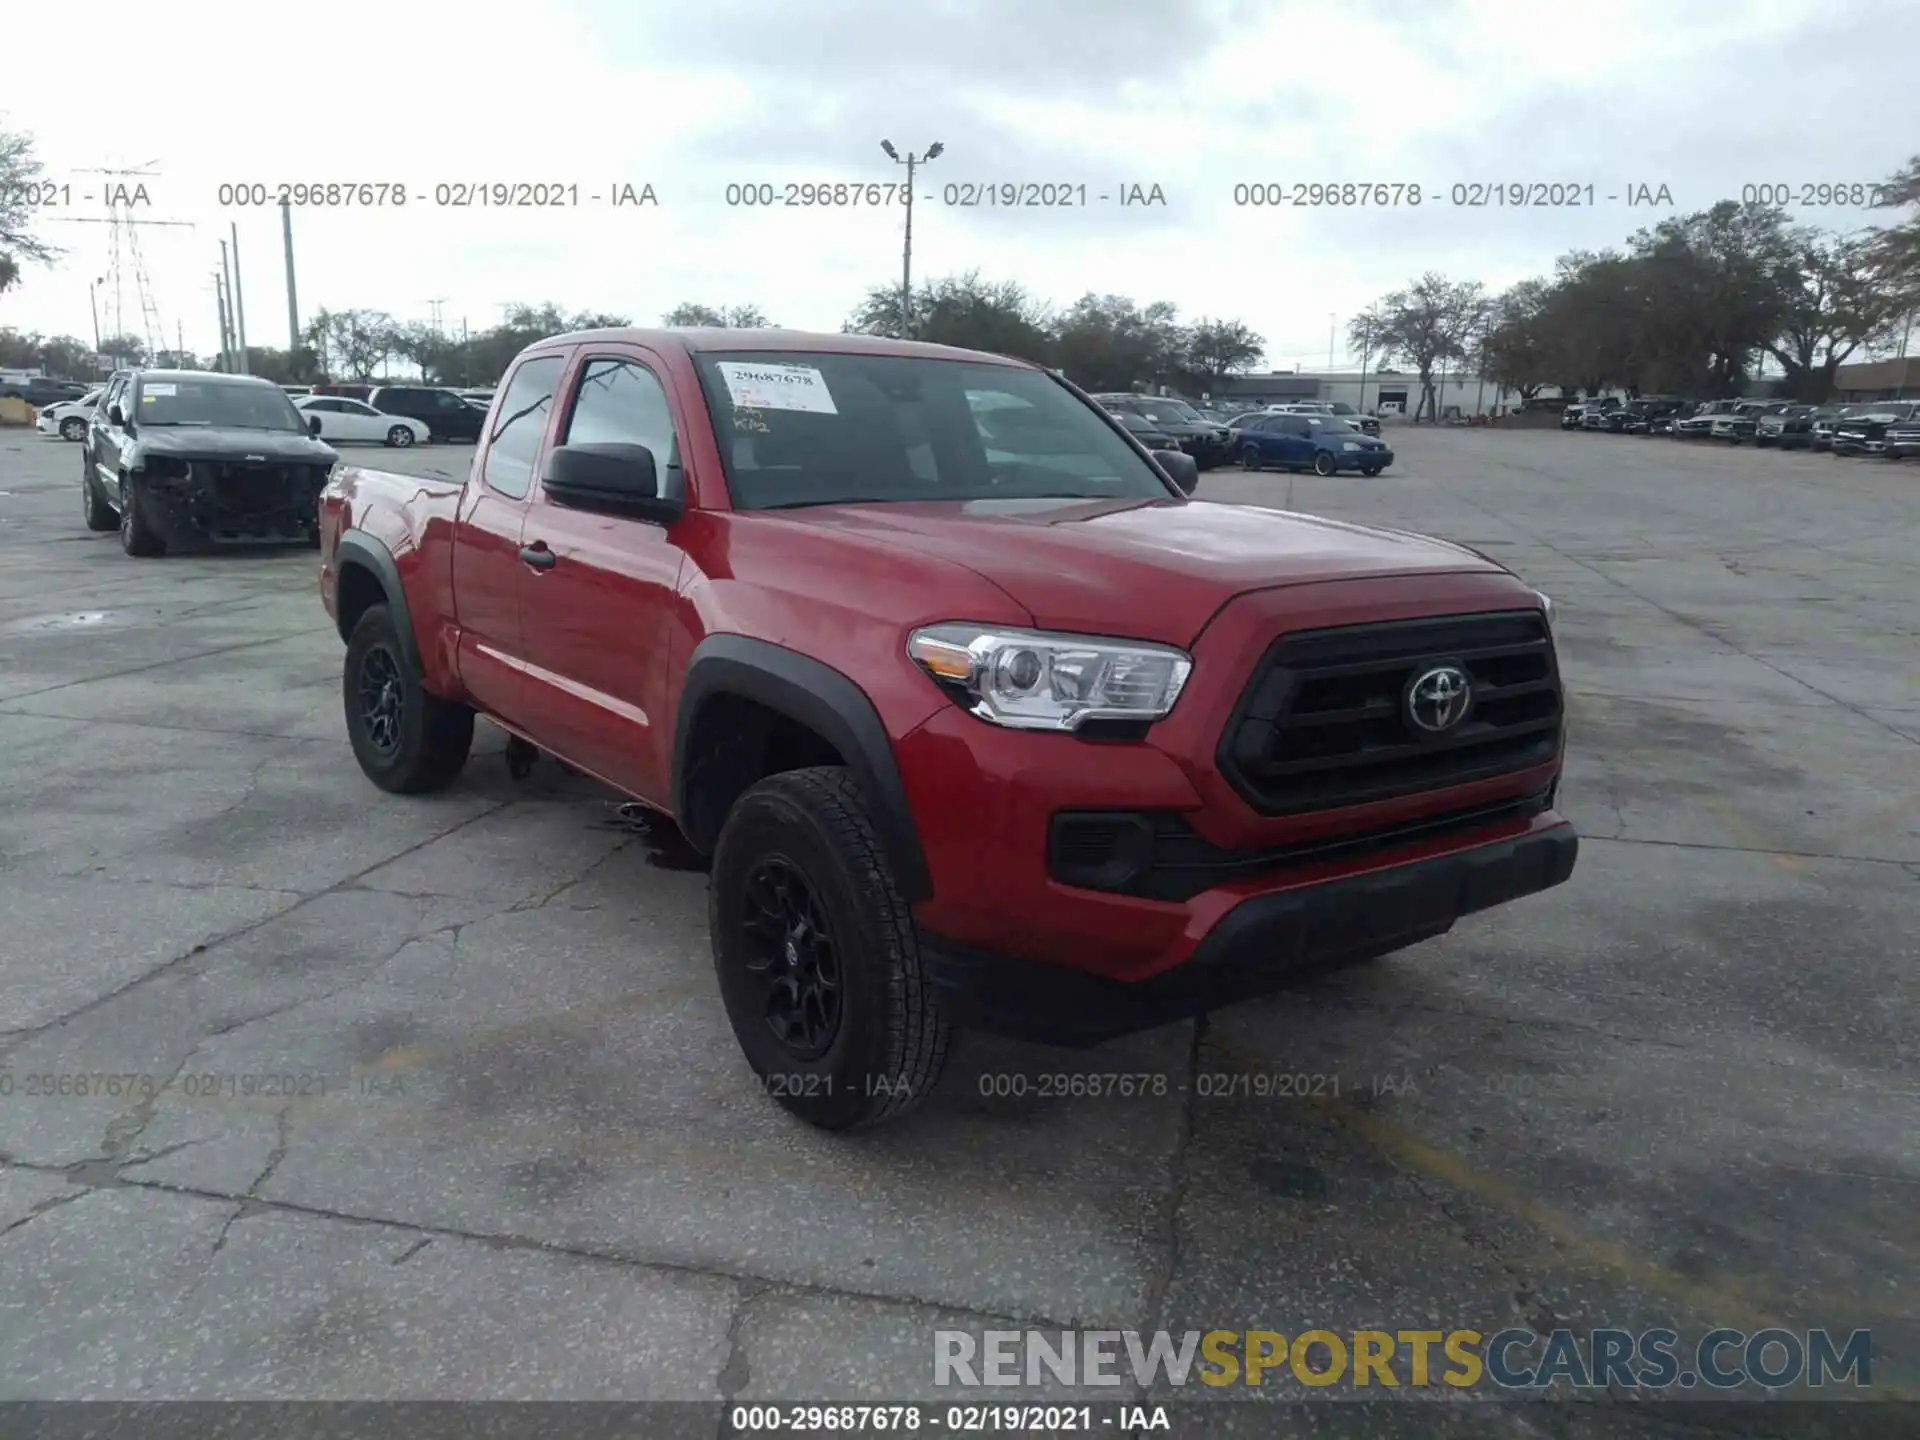 1 Photograph of a damaged car 5TFRX5GN6LX177004 TOYOTA TACOMA 2WD 2020